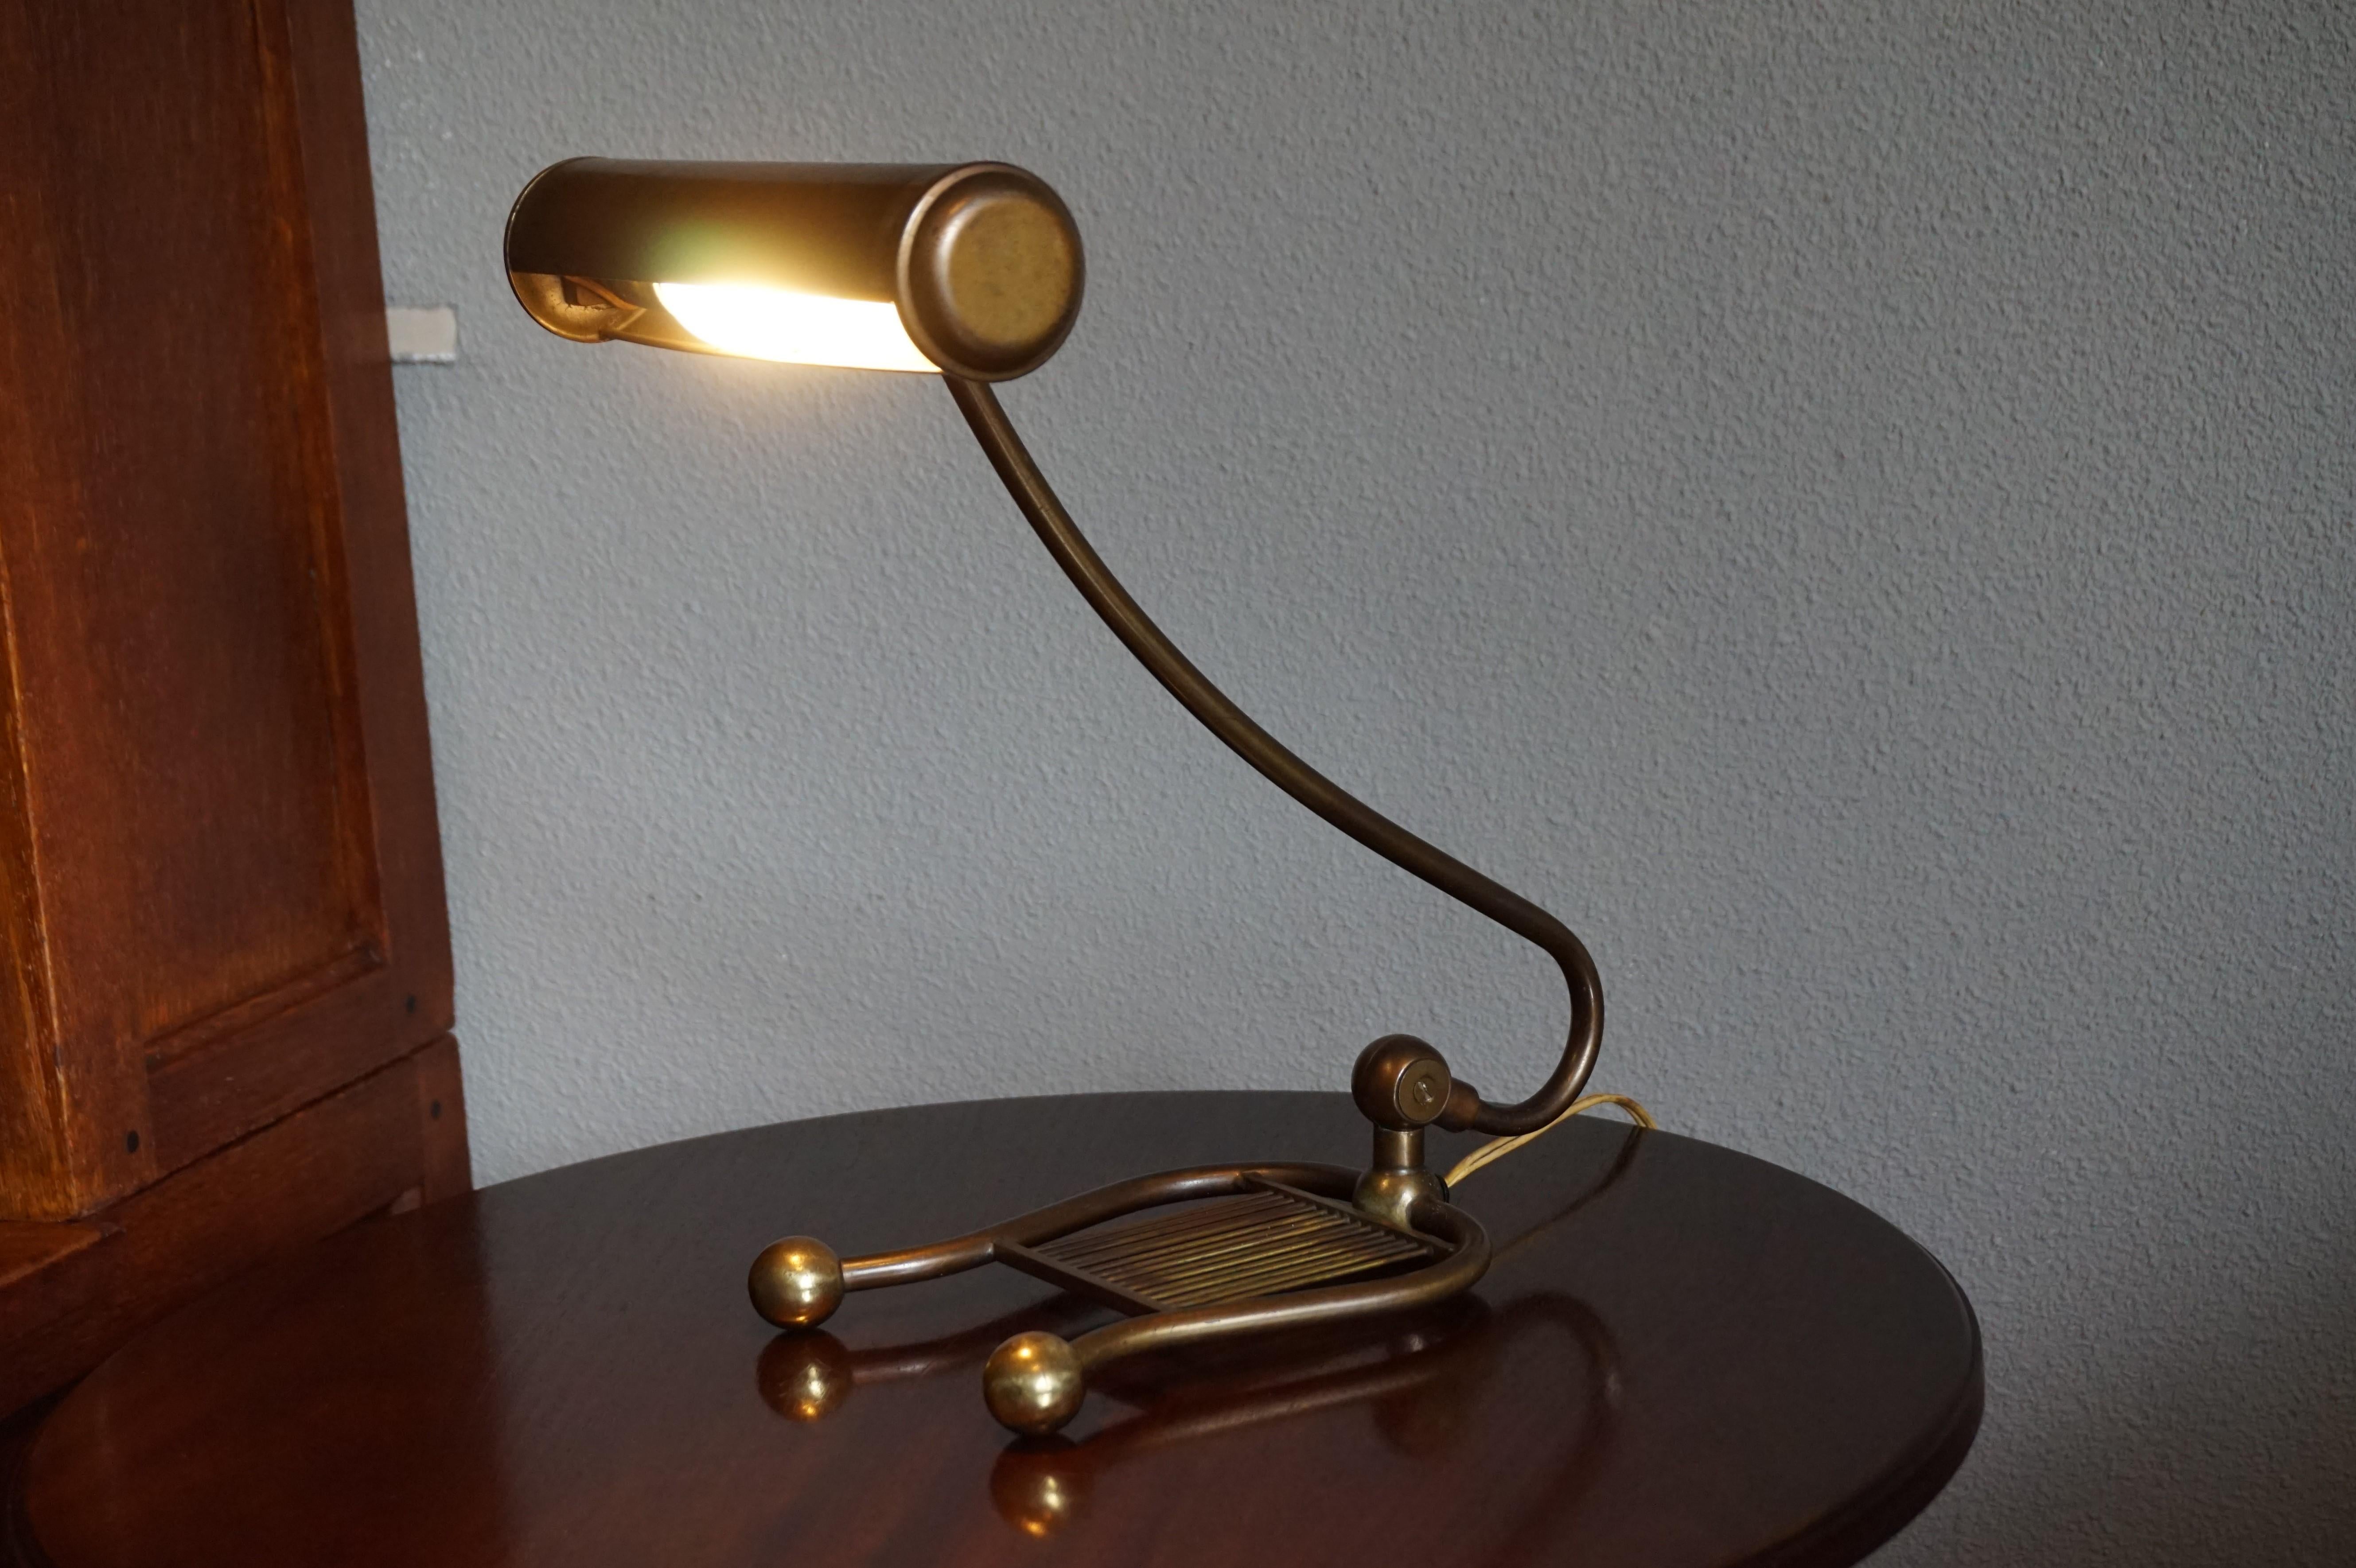 Stylish & Elegant Early to Mid-20th Century Harp Shaped Brass Piano or Desk Lamp 4